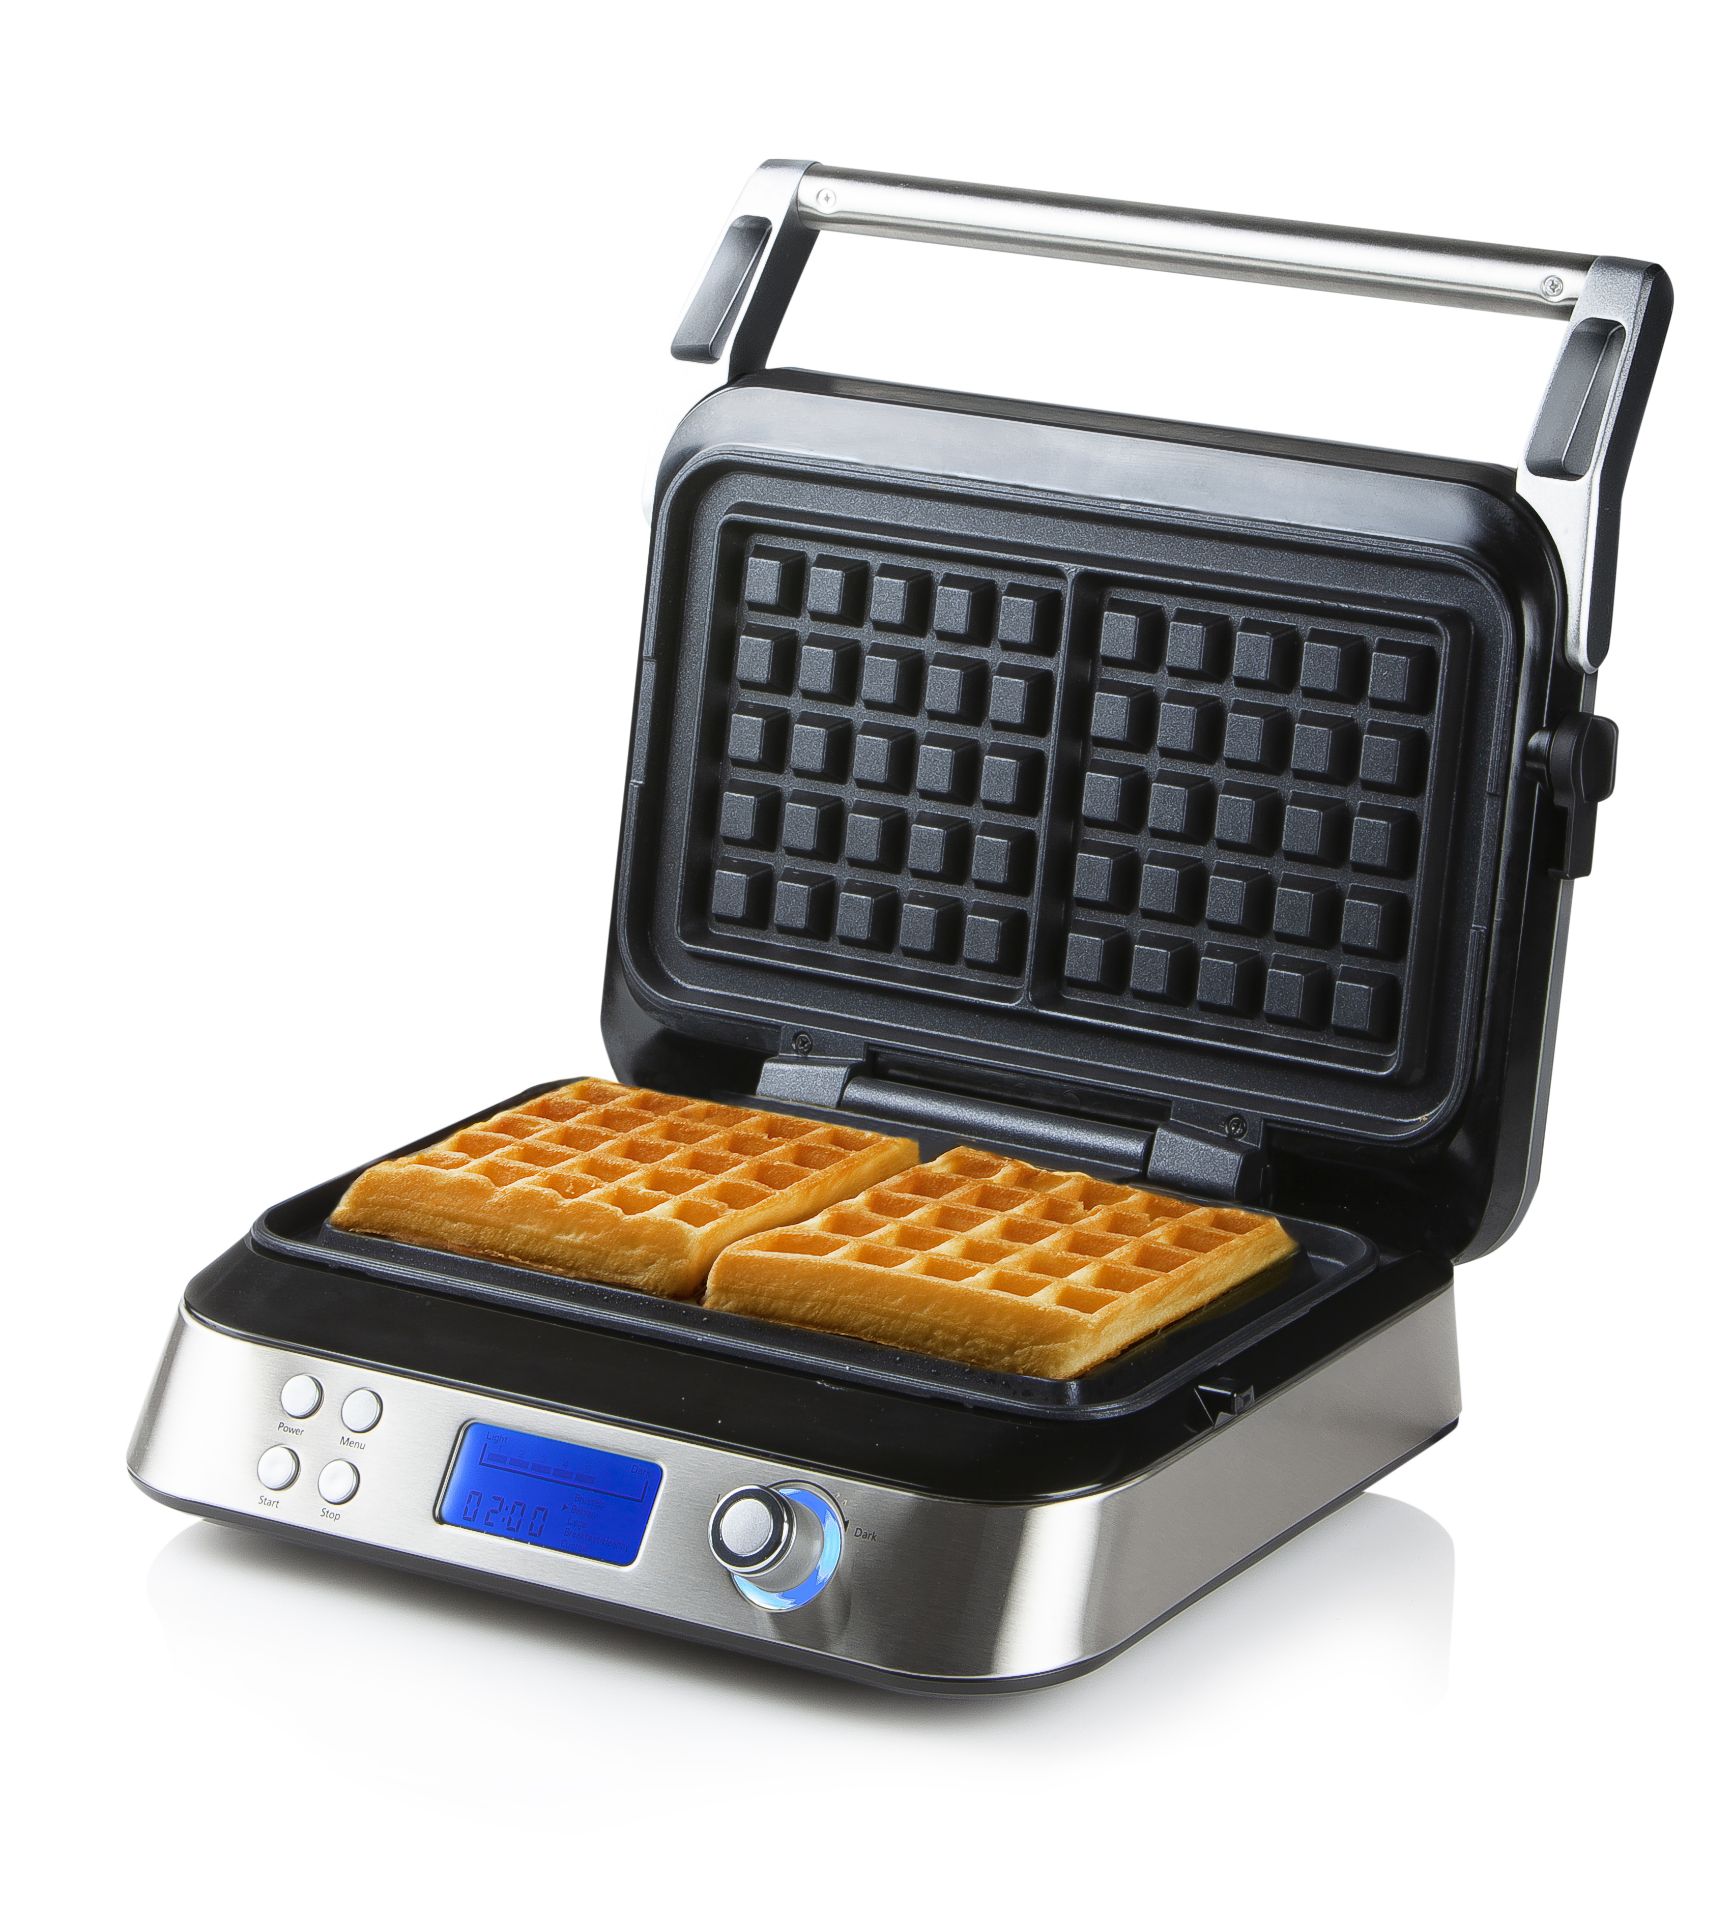 3 x DOMO Belgian Waffle Makers 1600W RRP £130 each £390 total - Image 6 of 7